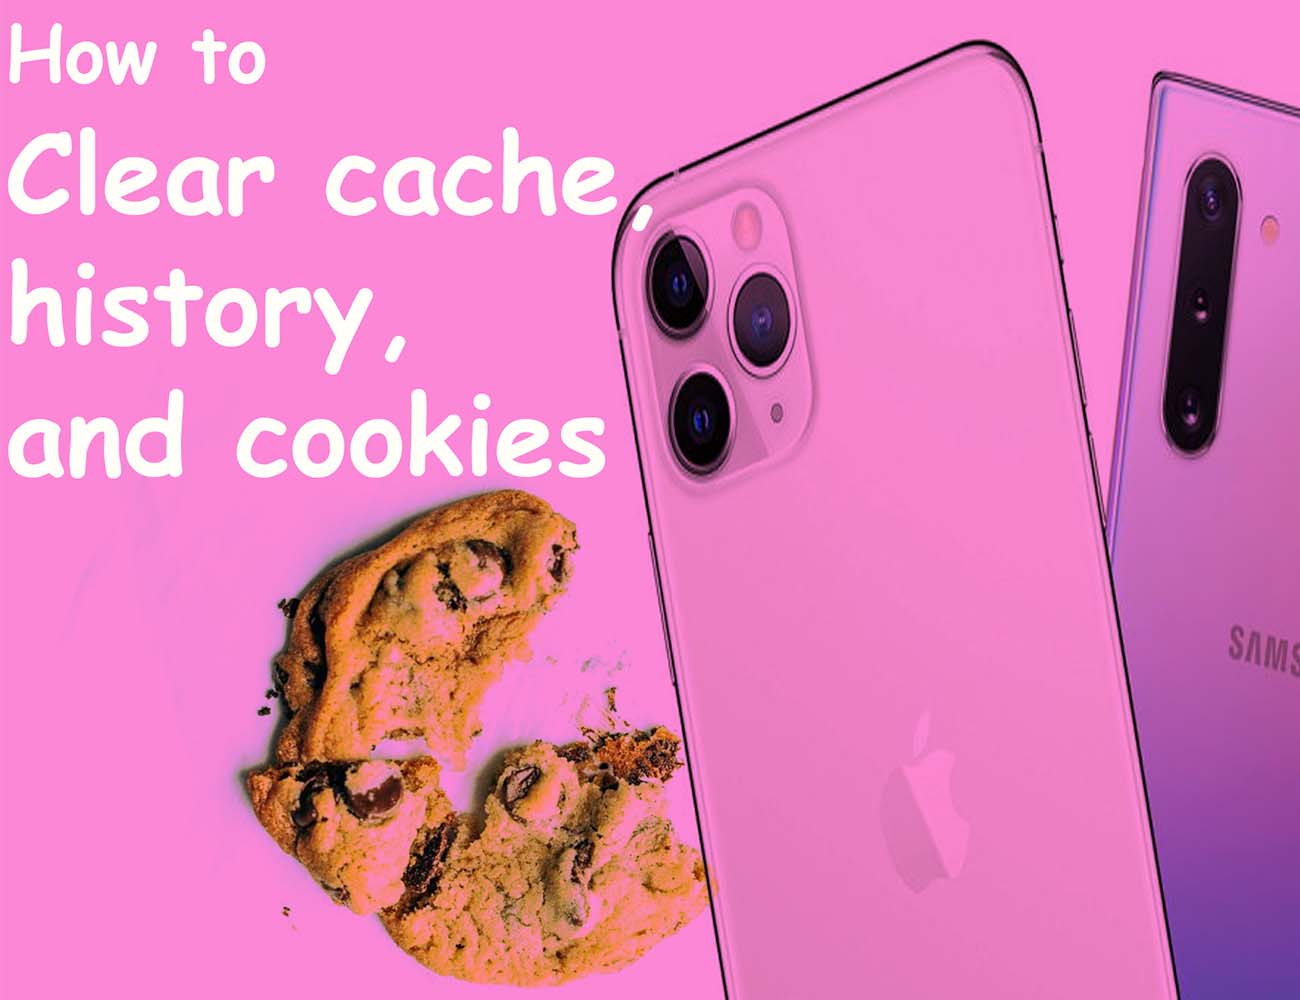 clear cookies and cache on android application